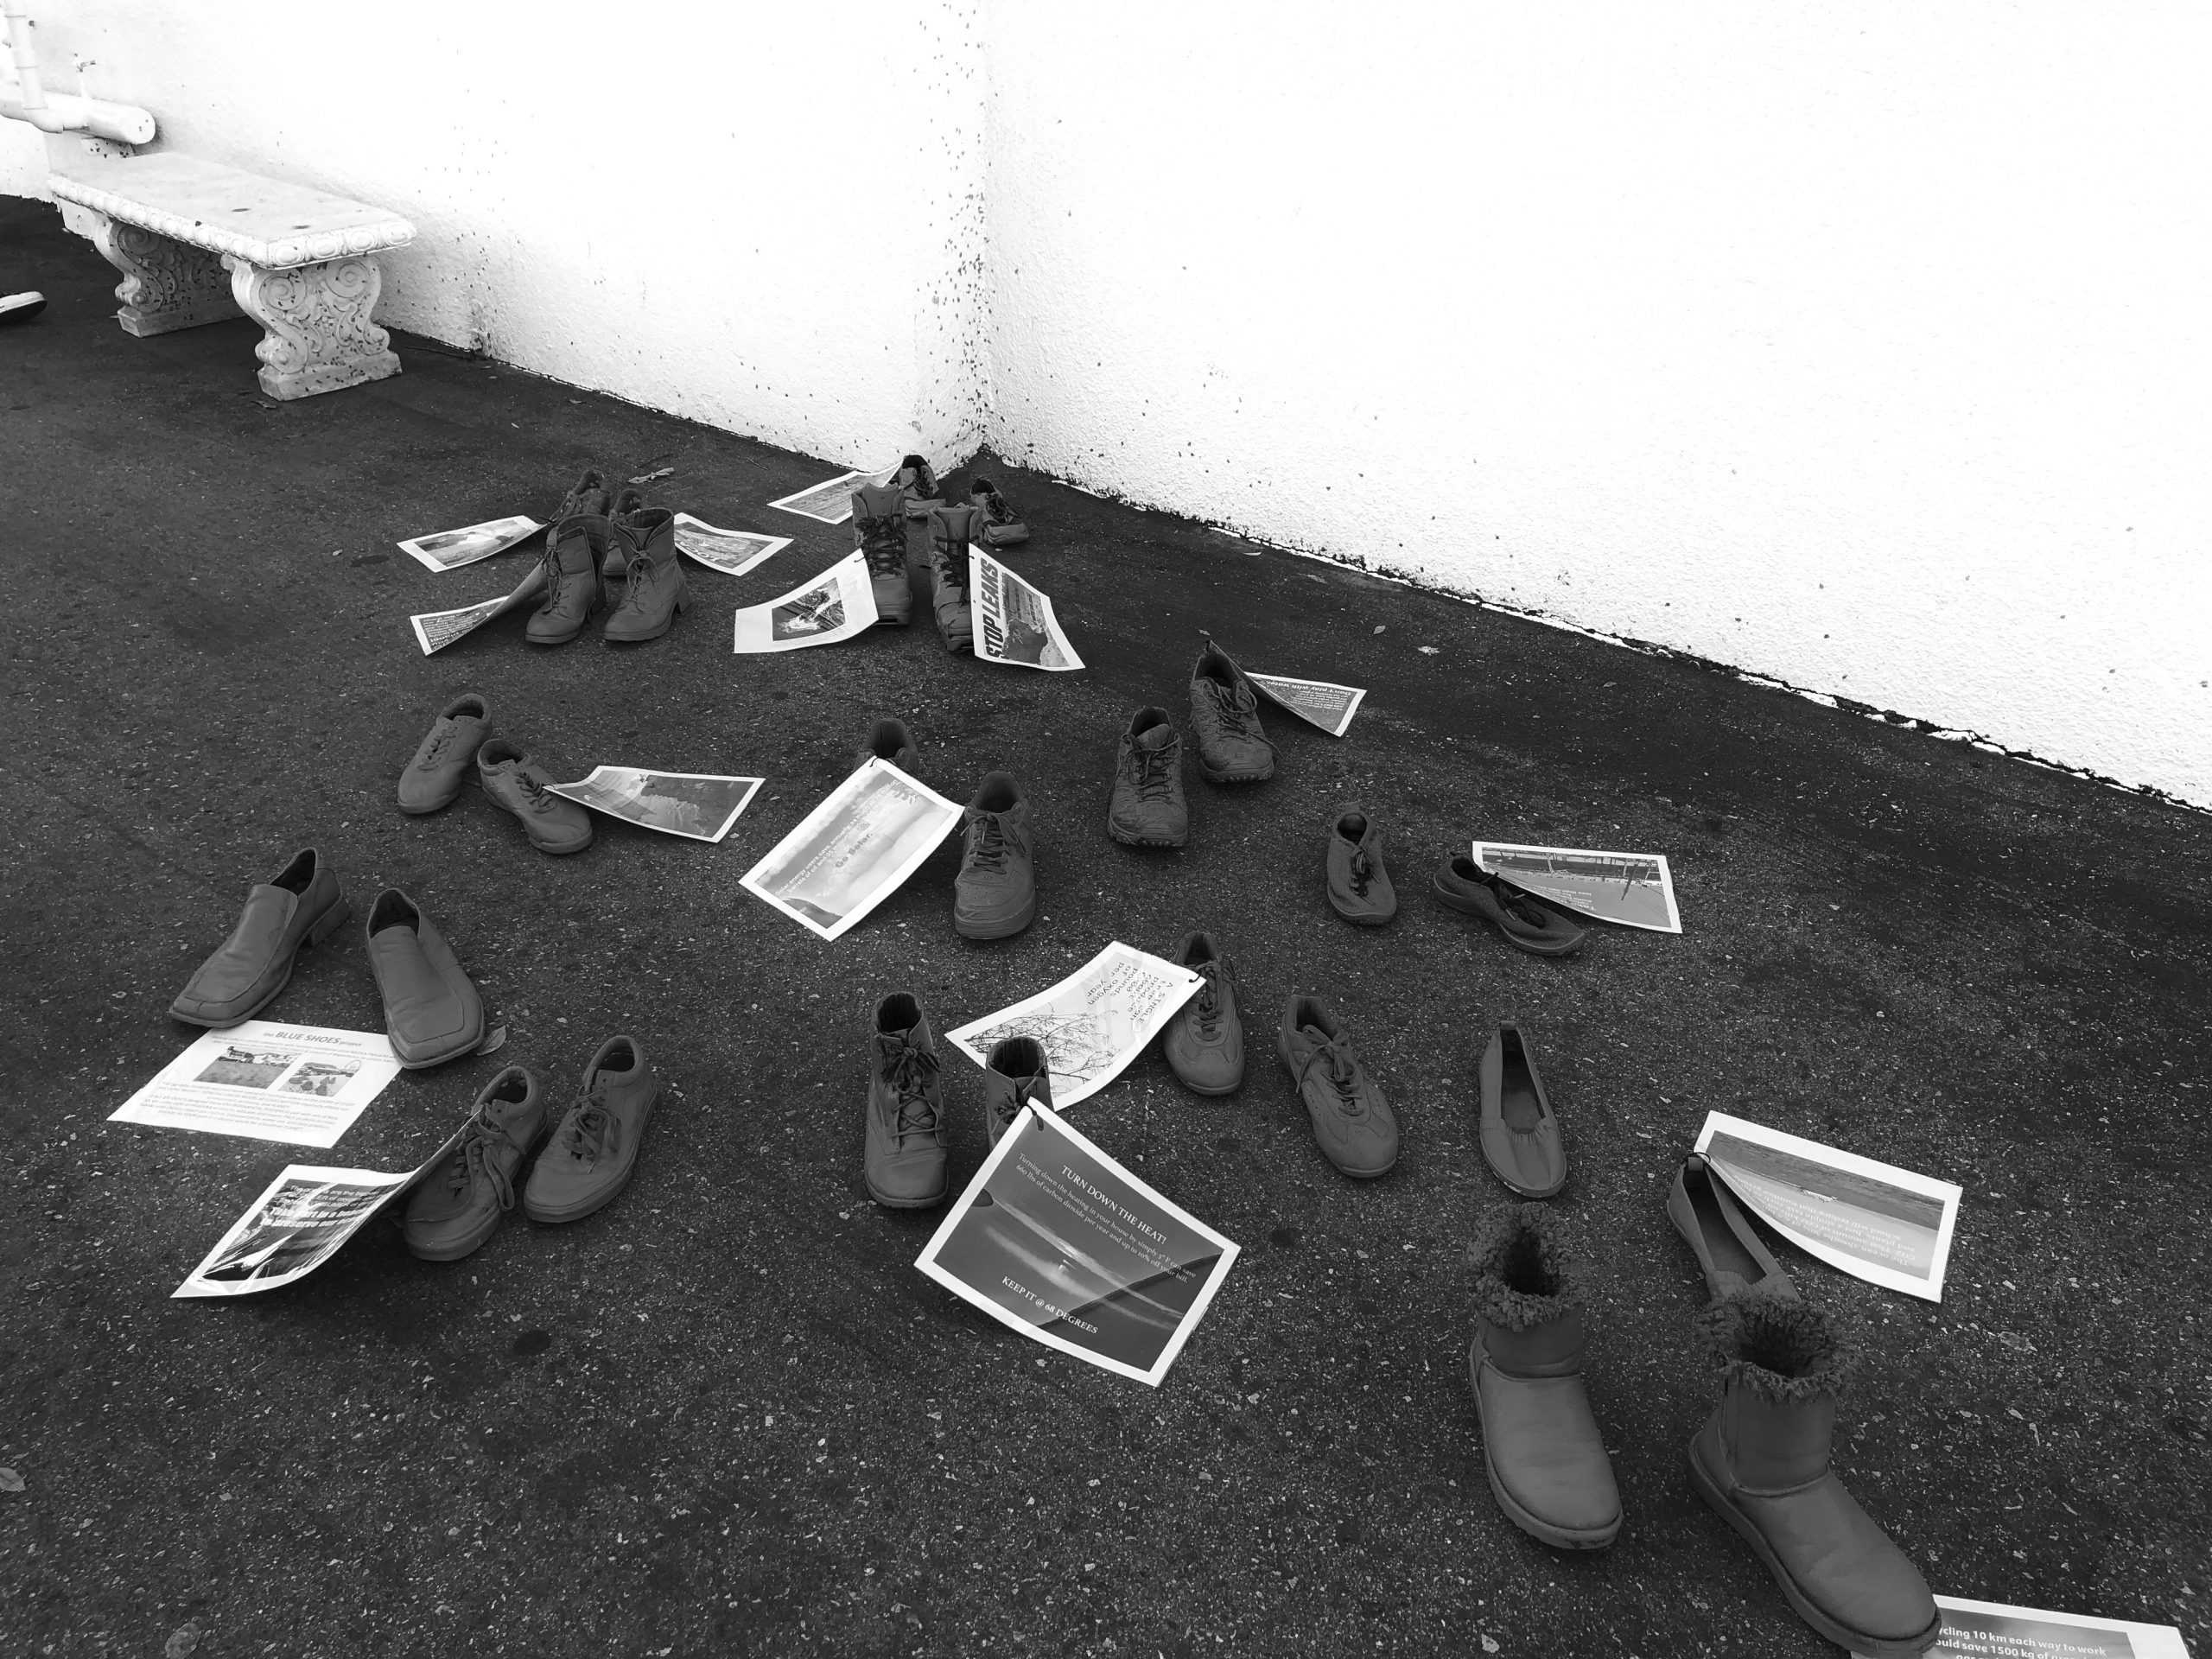 Photo students display blue shoes